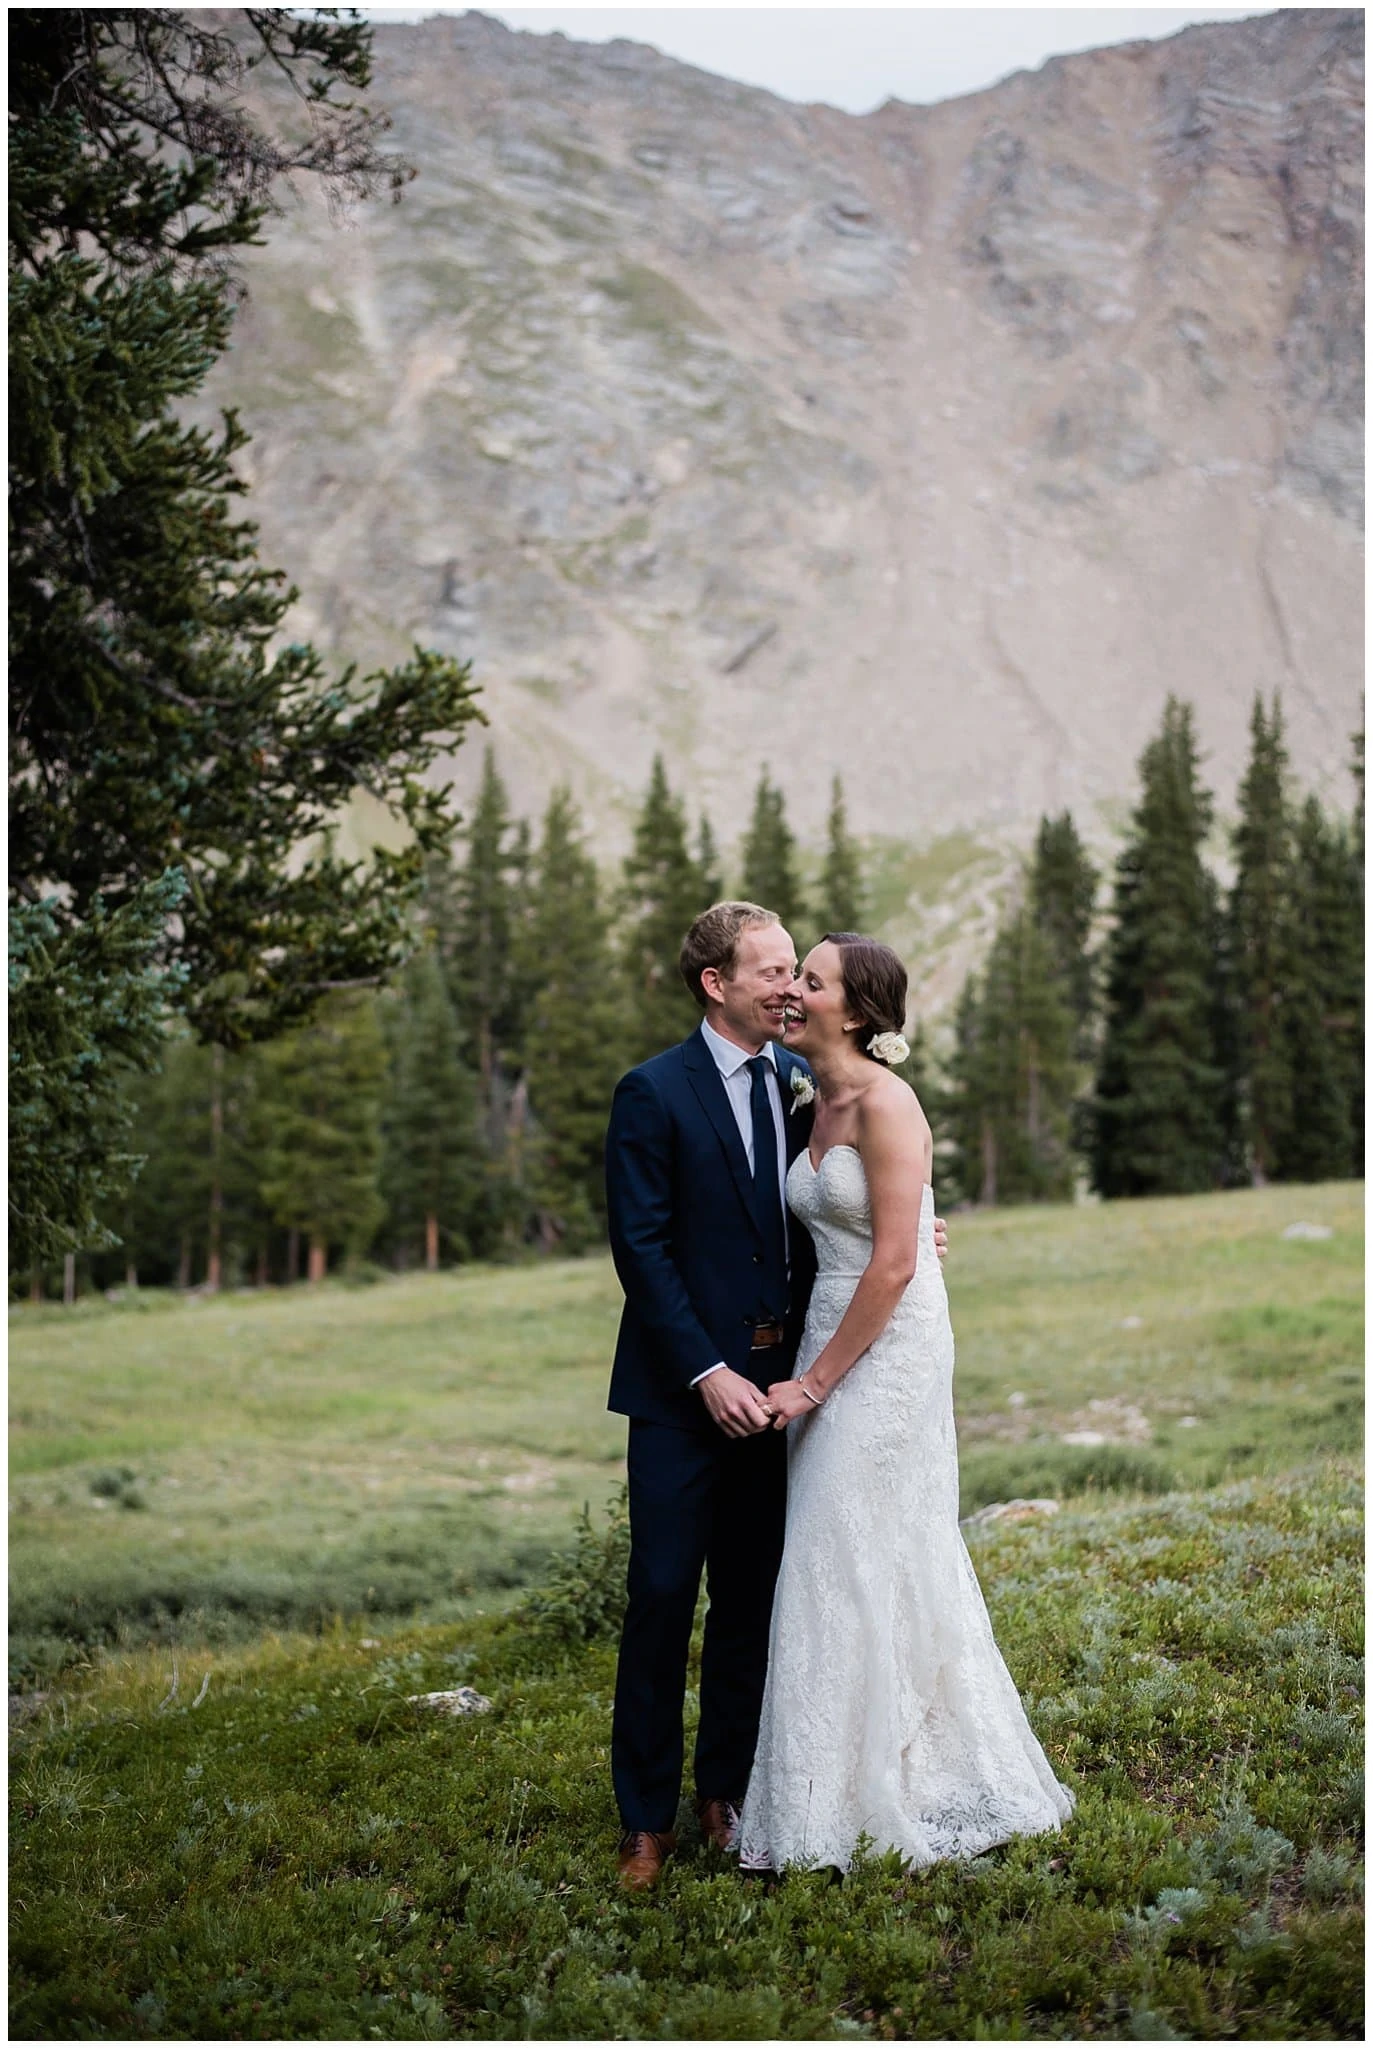 Bride and groom laughing at Arapahoe Basin Black Mountain Lodge Wedding by Arapahoe Basin Wedding Photographer Jennie Crate